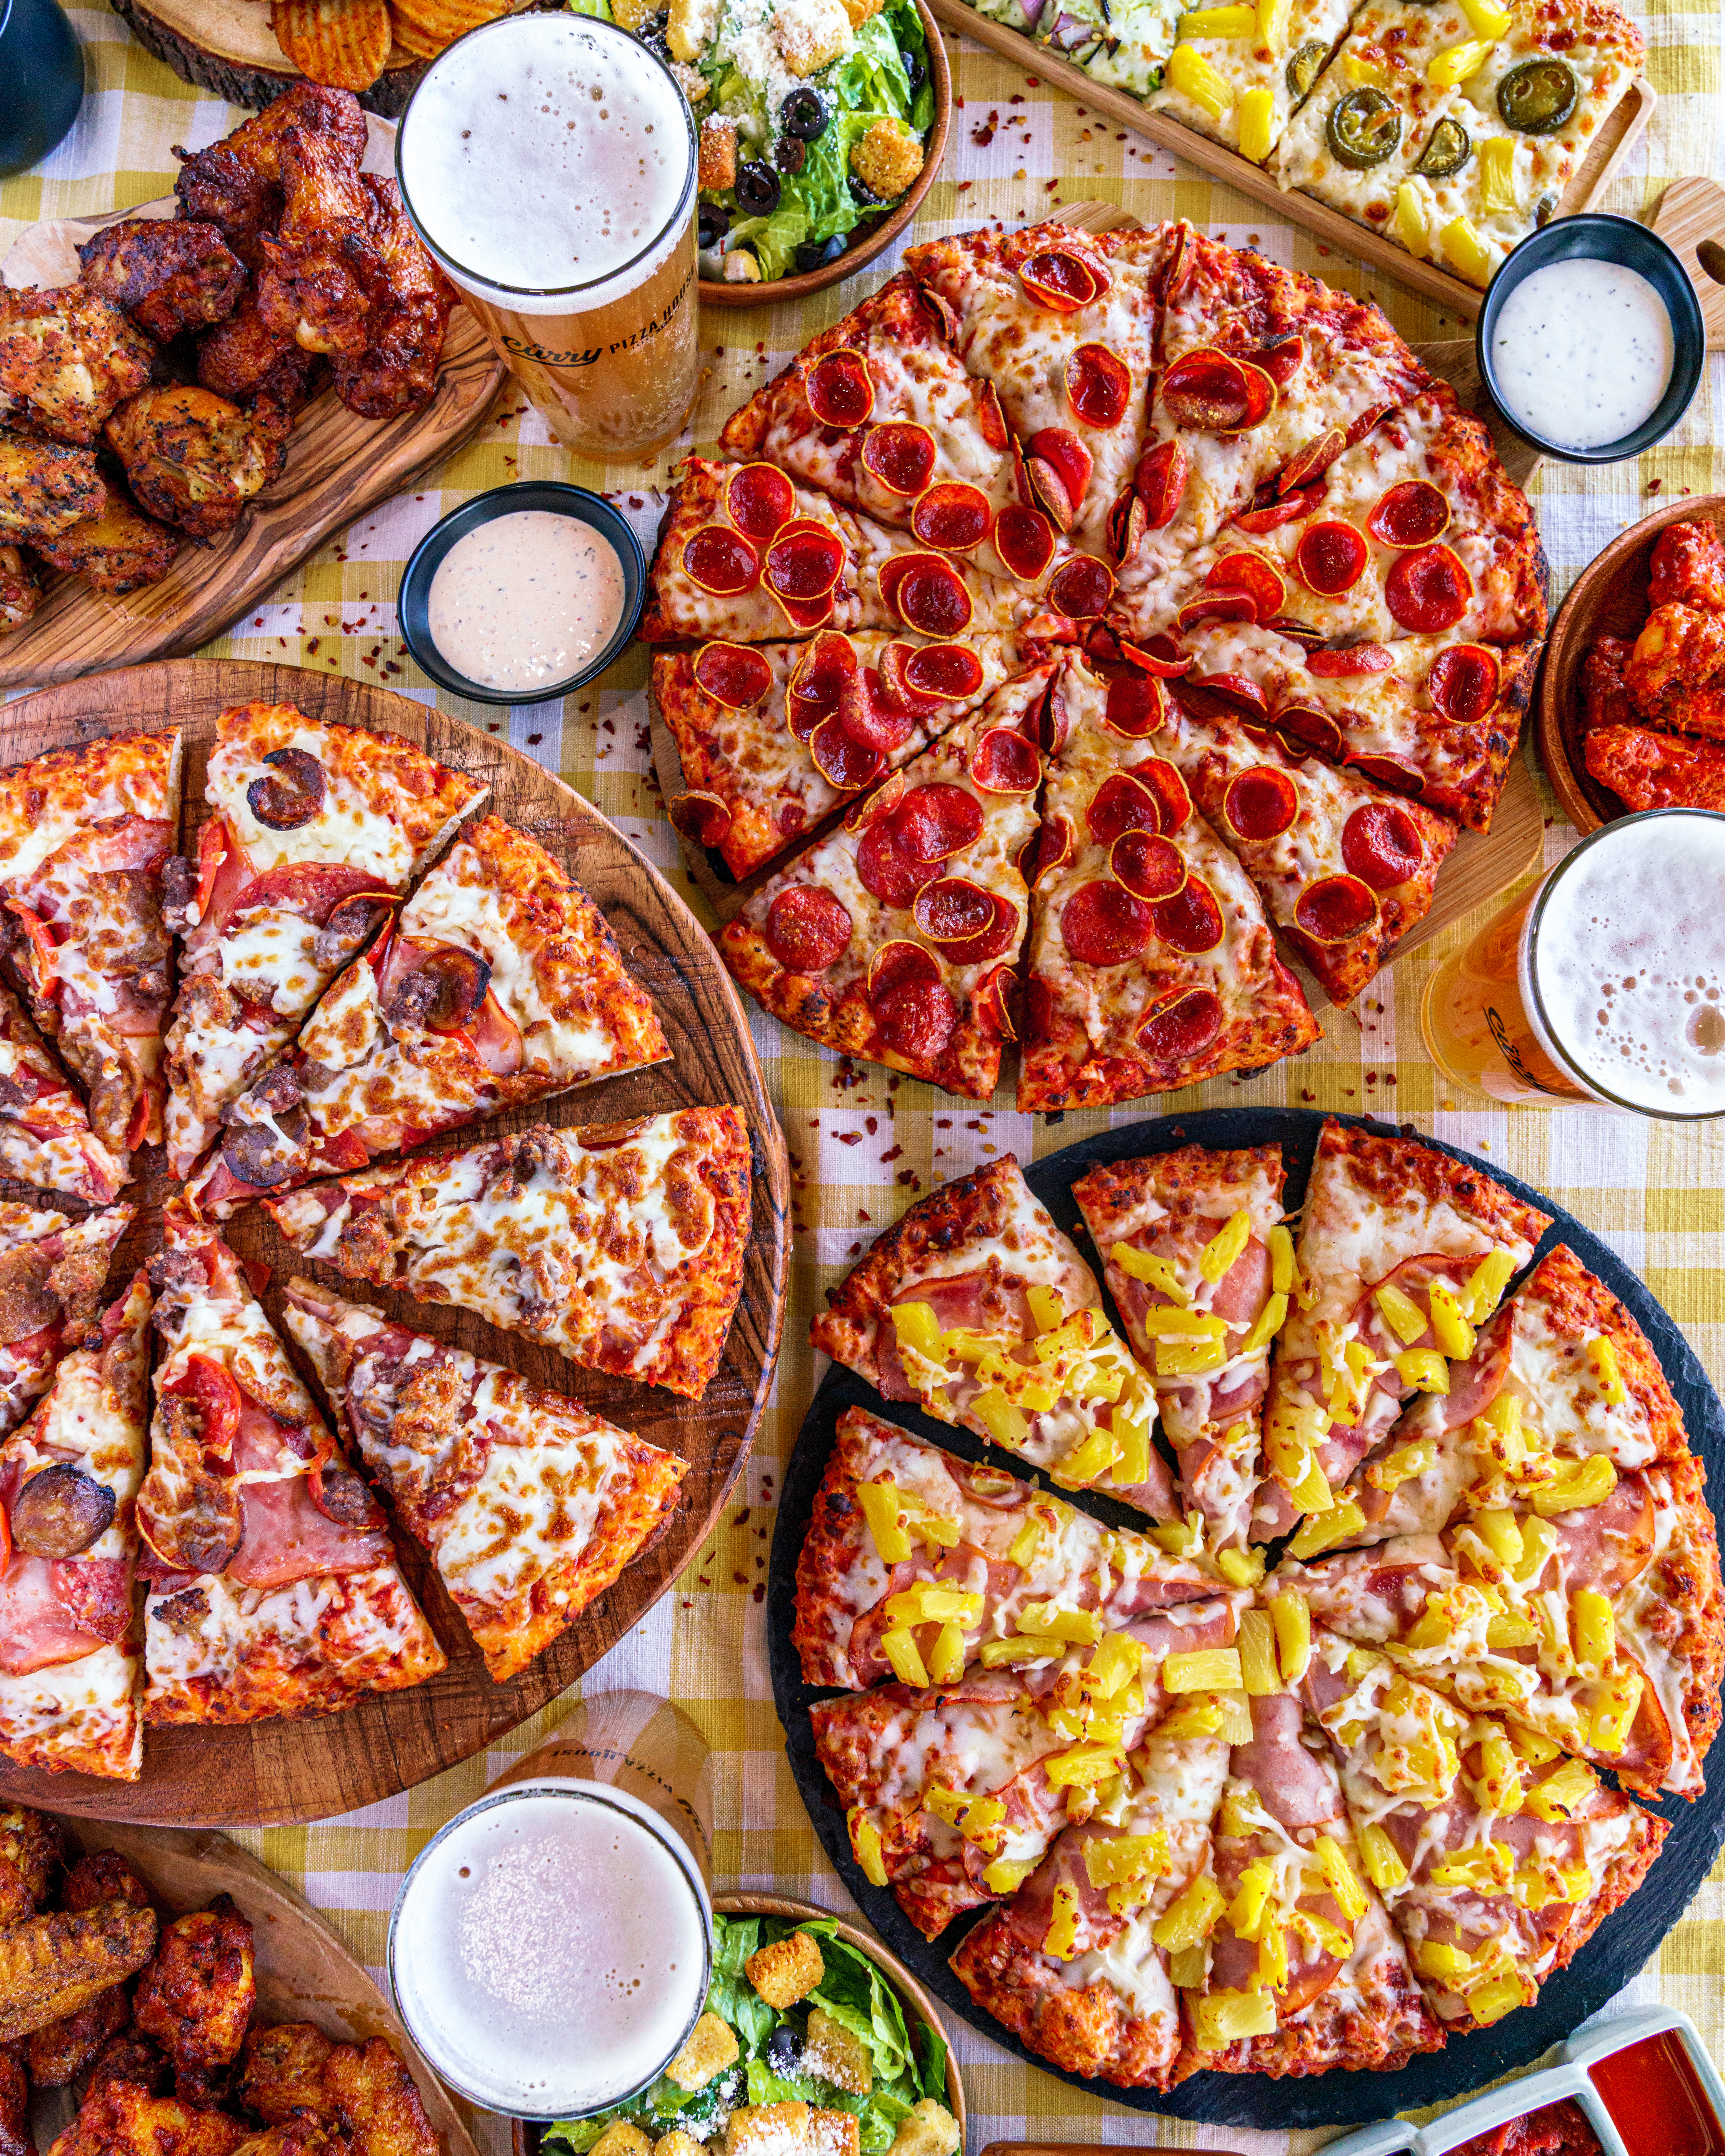 Three pizzas cut into slices - Hawaiian, Meat Lovers, and Pepperoni - on a table with beer